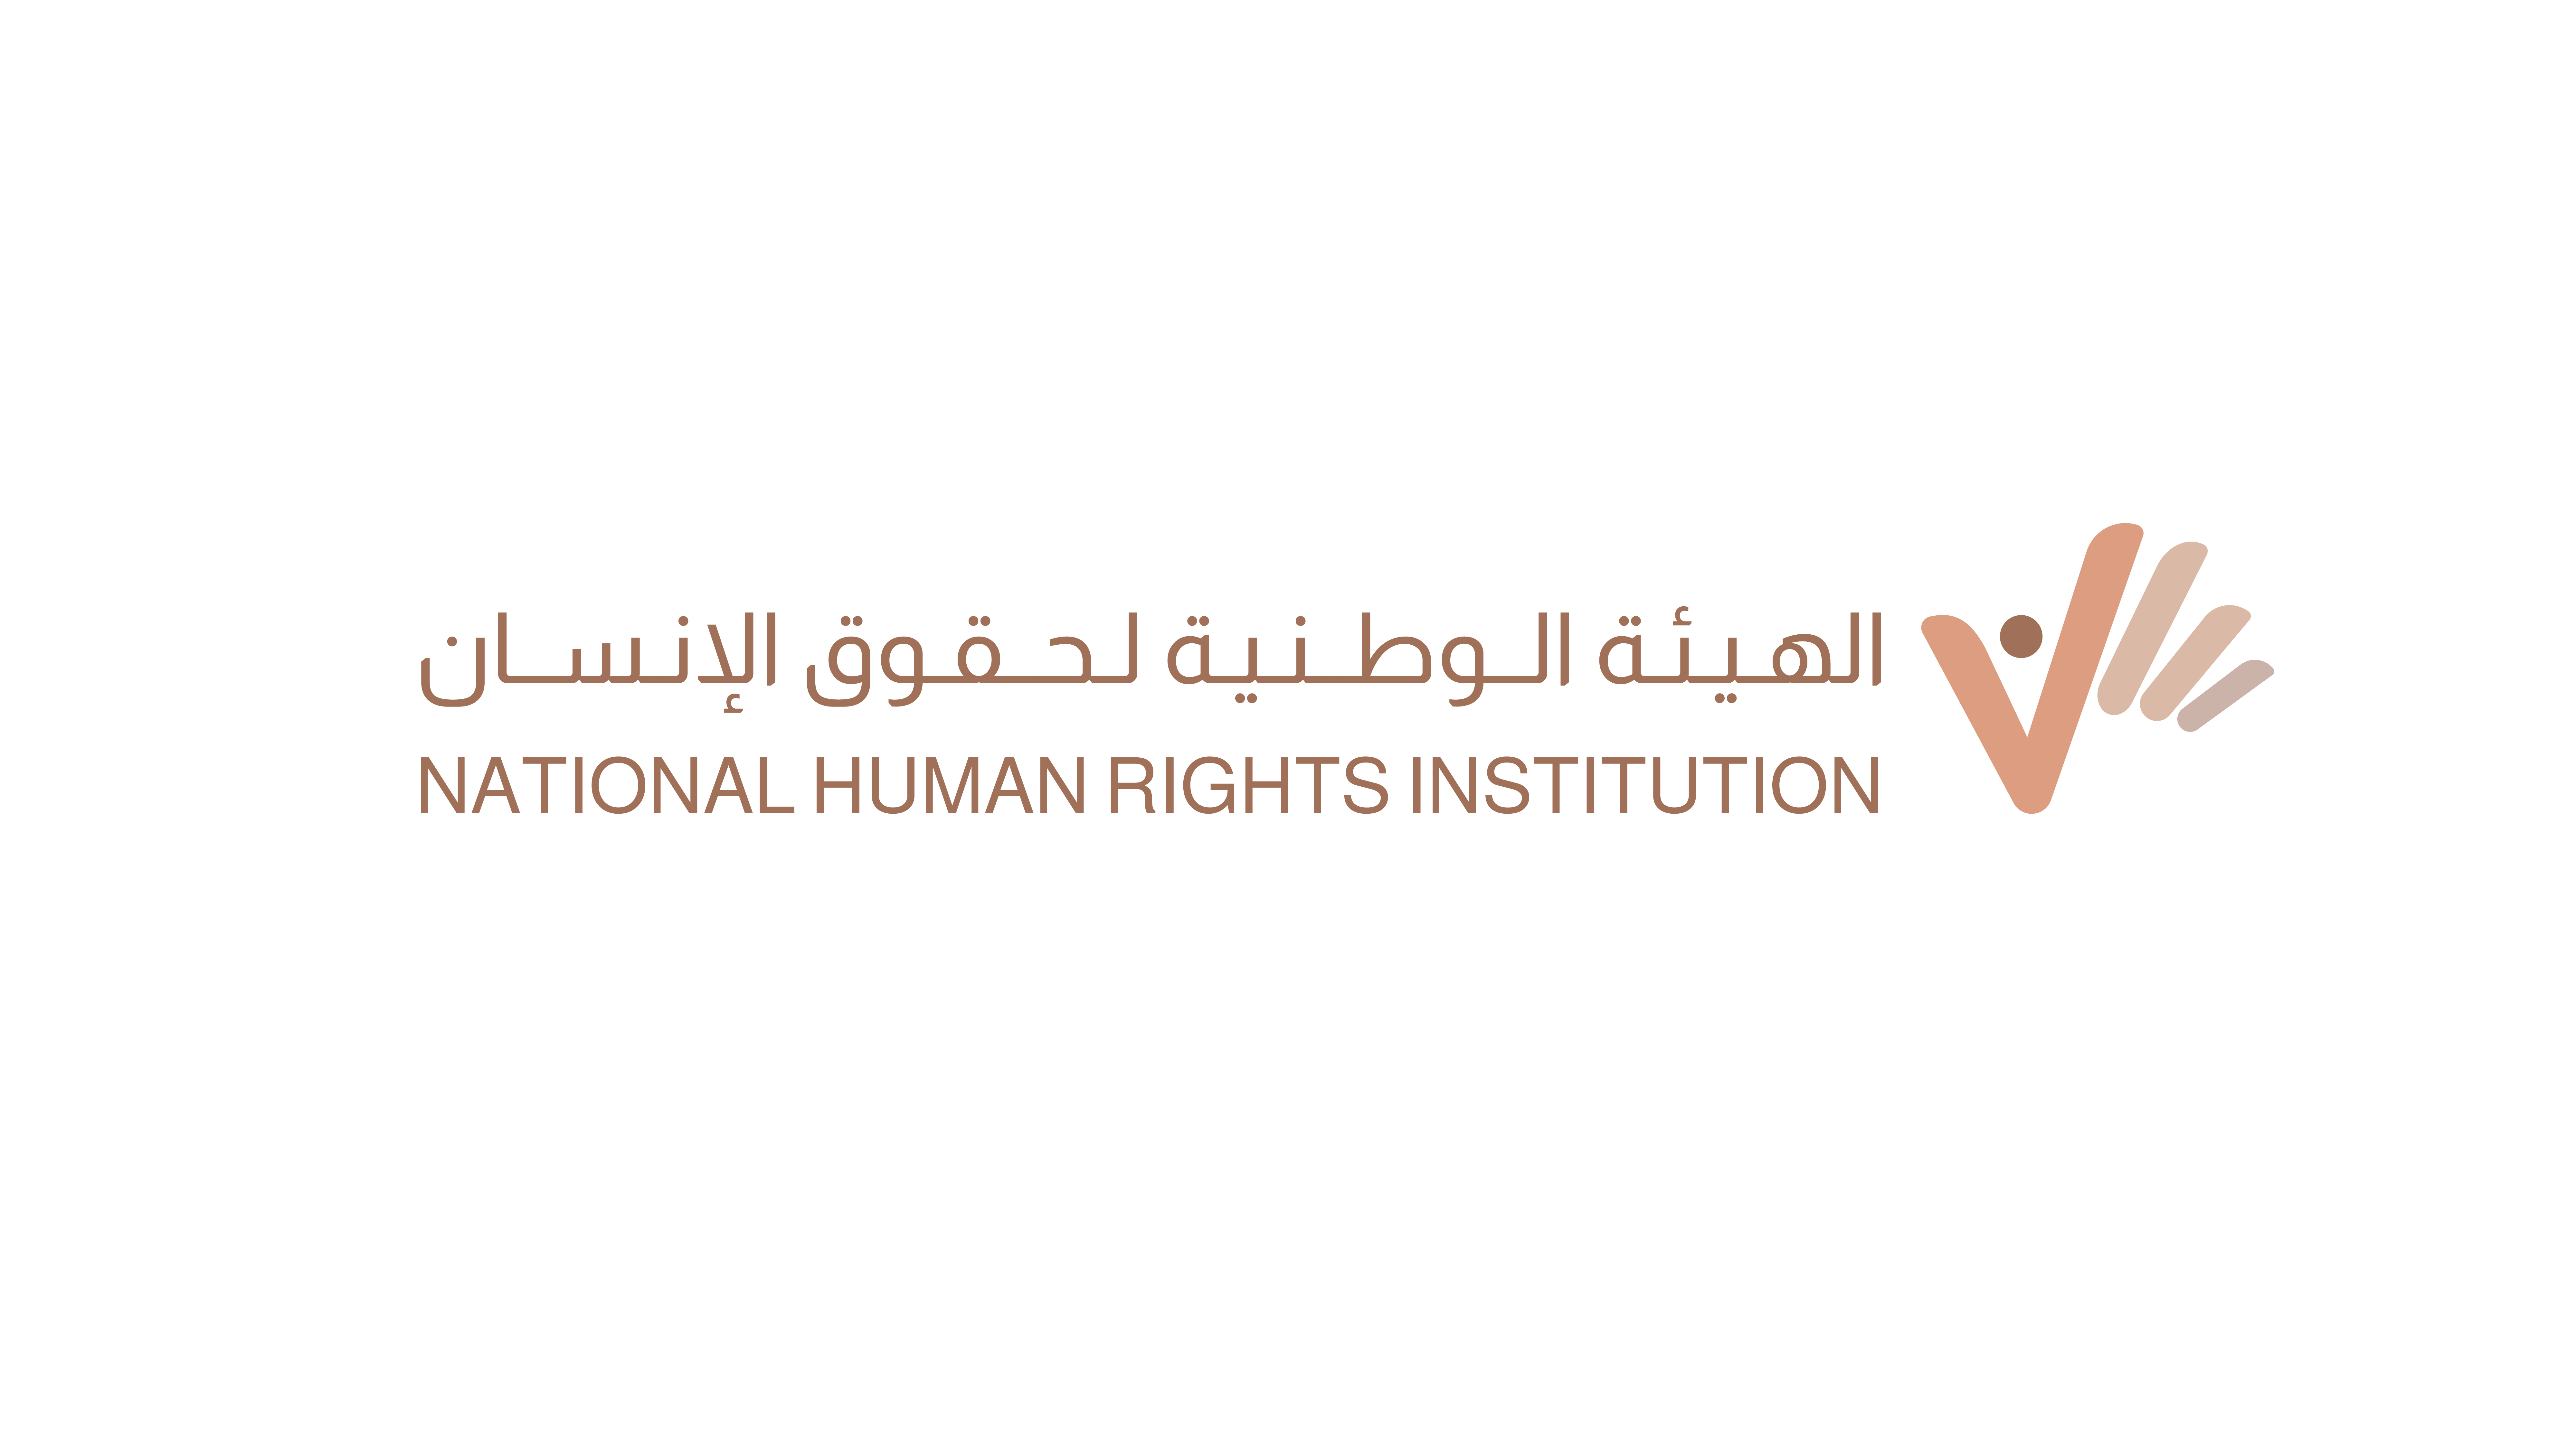 The Board of Trustees of the National Human Rights Institution holds its Fifth Meeting with the Participation Government Representatives